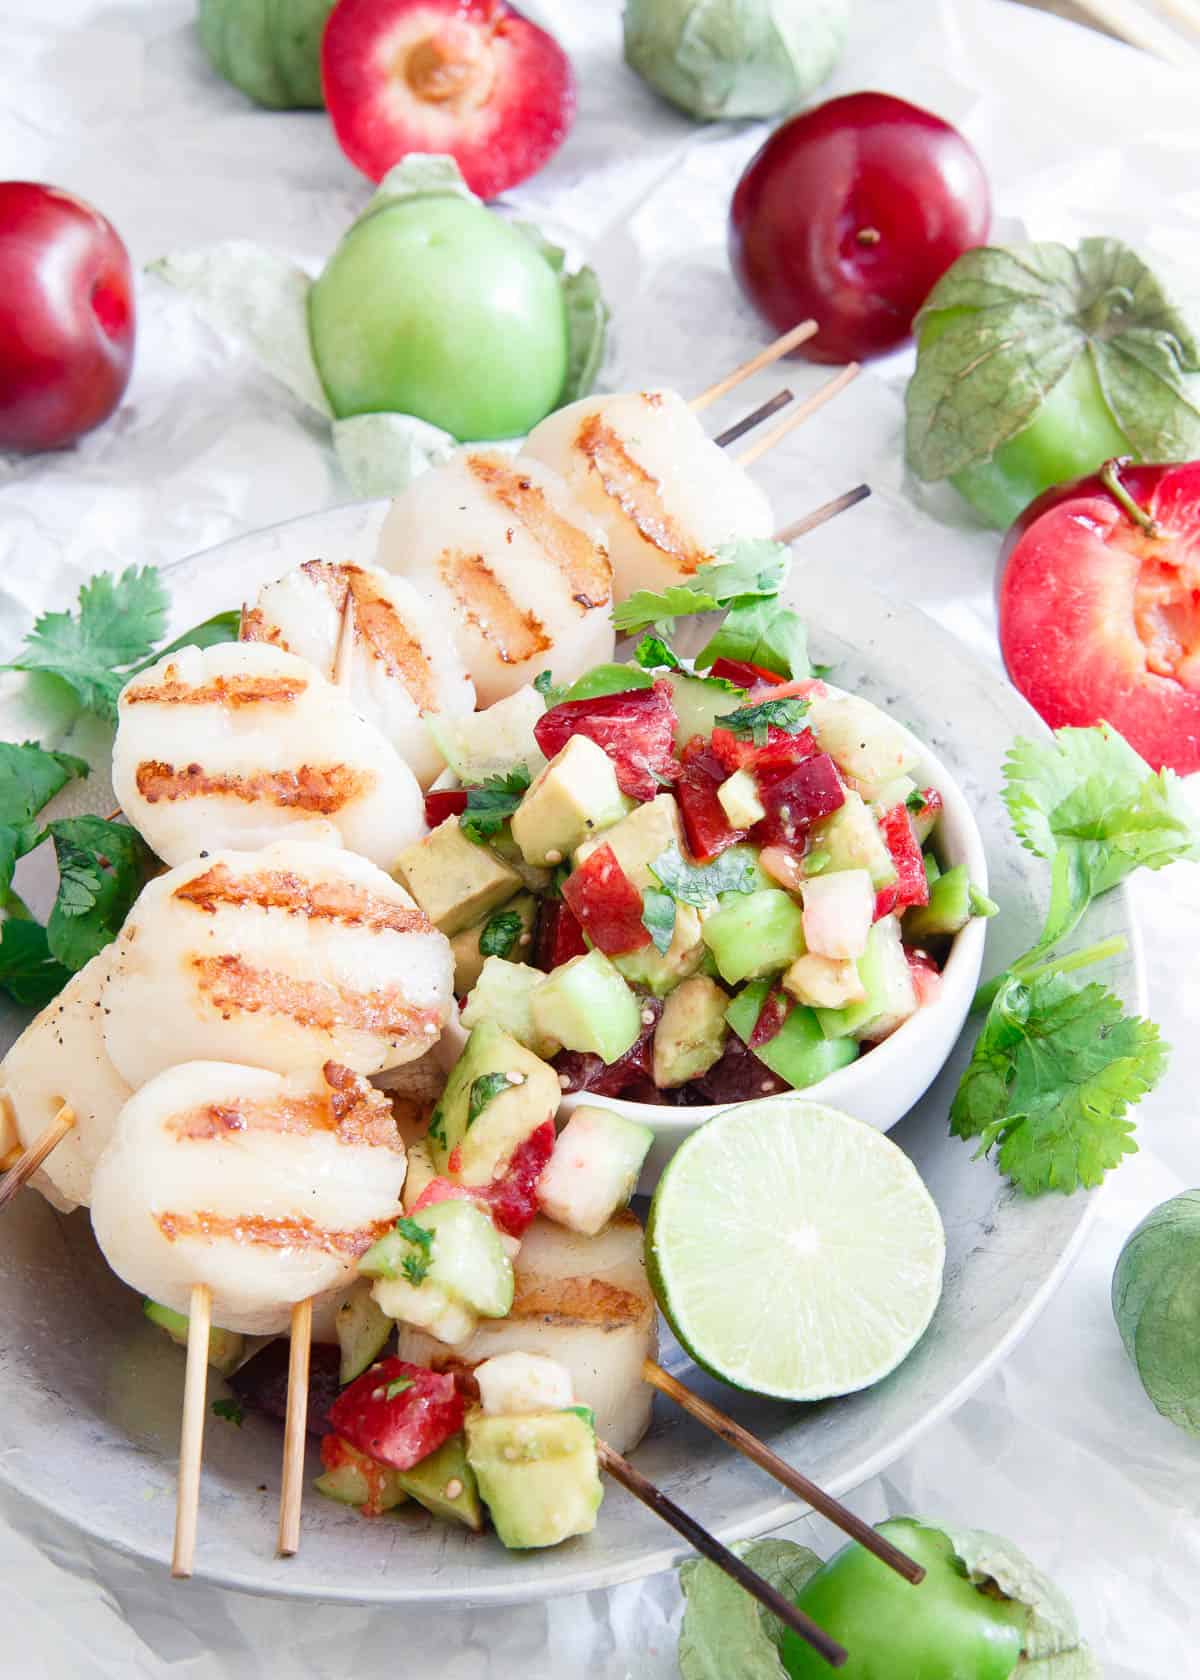 These grilled scallops are simply prepared and topped with a fresh summery tomatillo plum salsa for a delicious light meal.